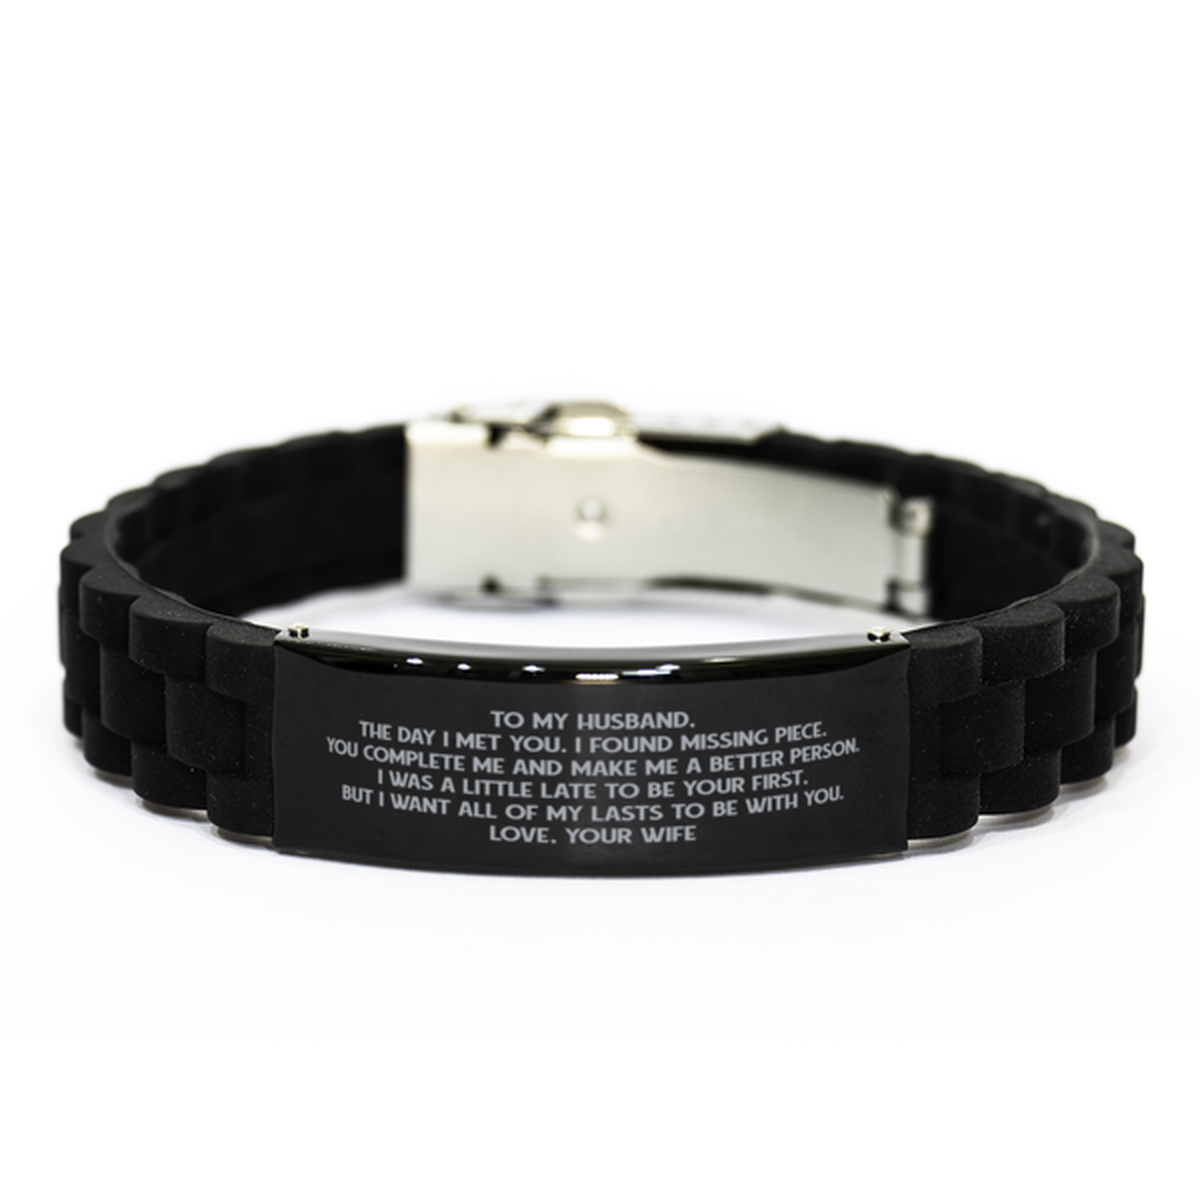 To My Husband Black Bracelet, I Found Missing Piece, Anniversary Gifts For Husband From Wife, Birthday Gifts For Men